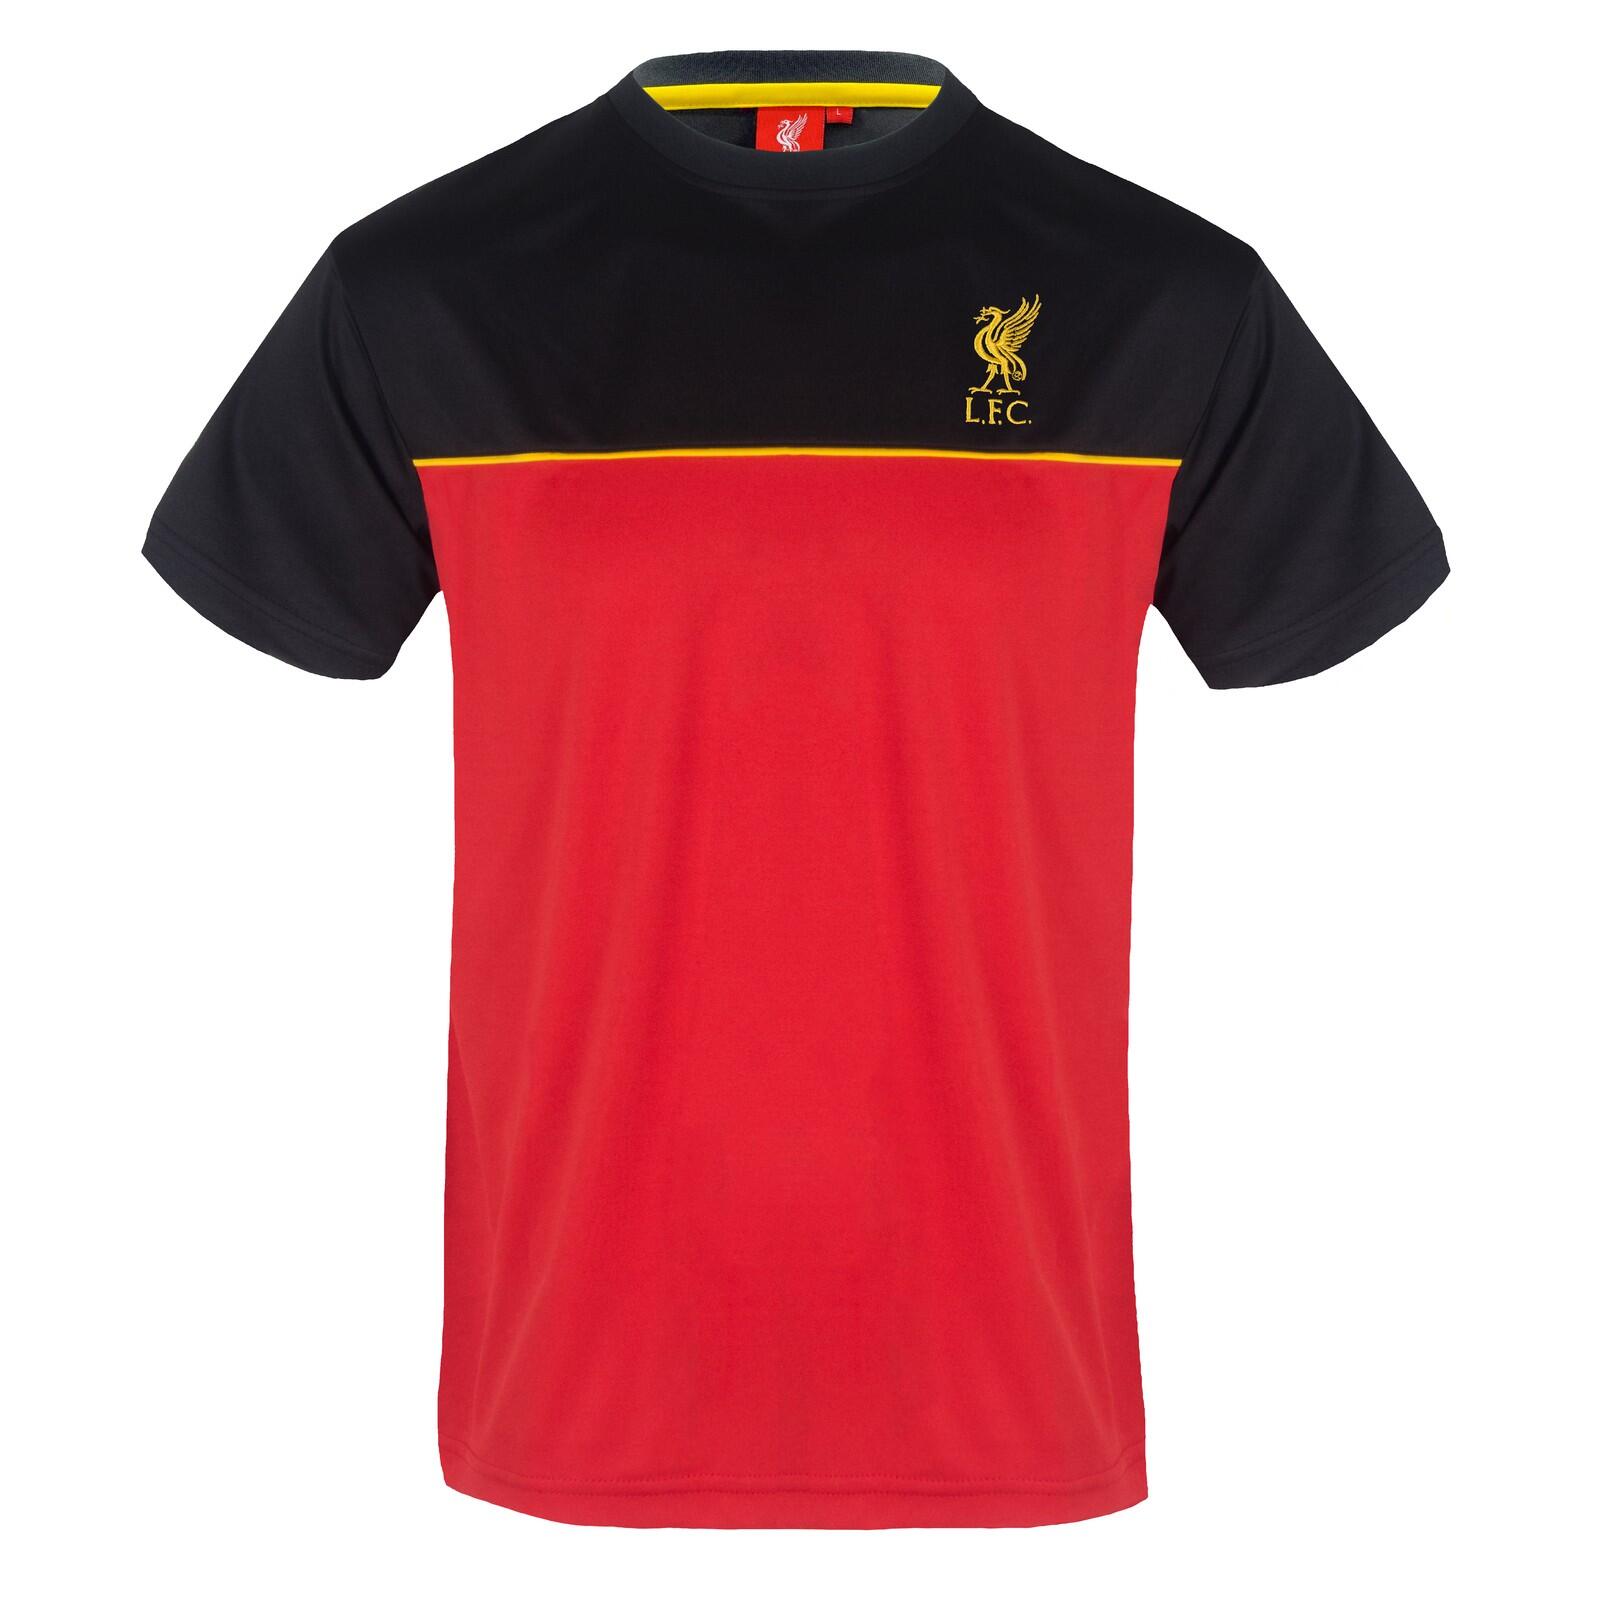 LIVERPOOL FC Liverpool FC Mens T-Shirt Poly Training Kit OFFICIAL Football Gift